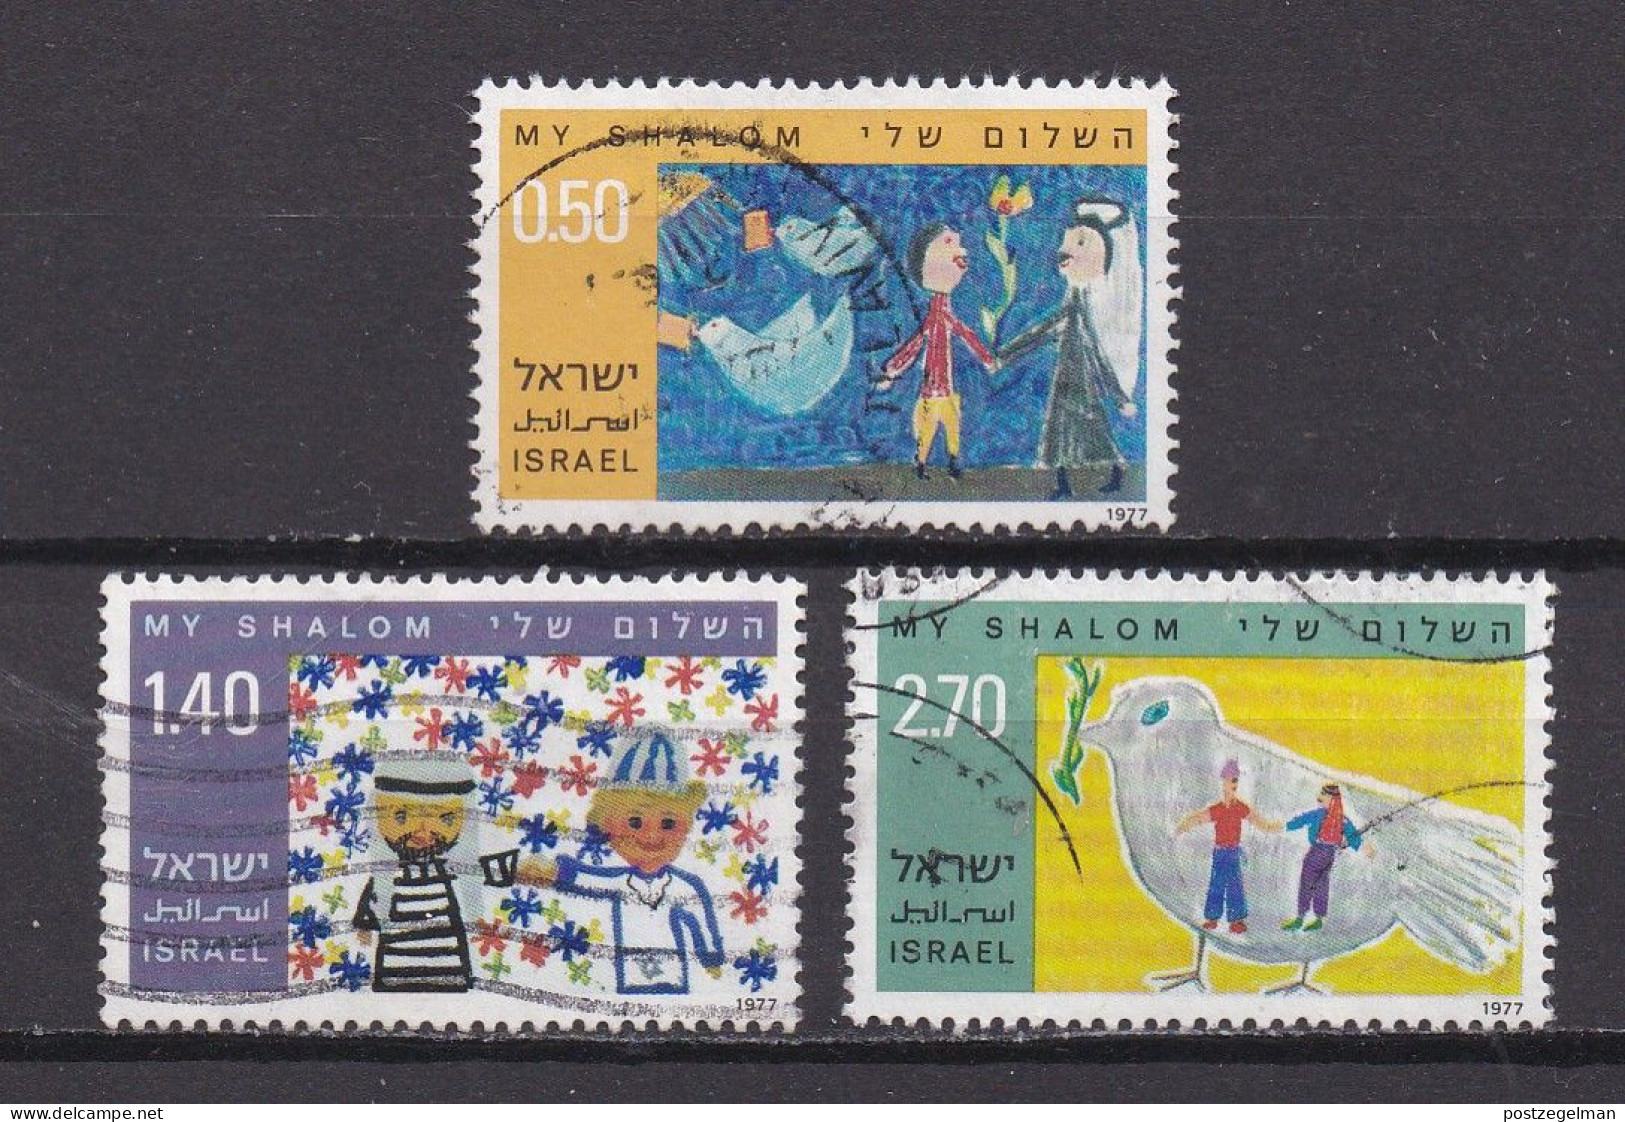 ISRAEL, 1977, Used Stamp(s)  Without  Tab, Children's Drawings, SG Number(s) 659-661, Scannr. 19078 - Usados (sin Tab)